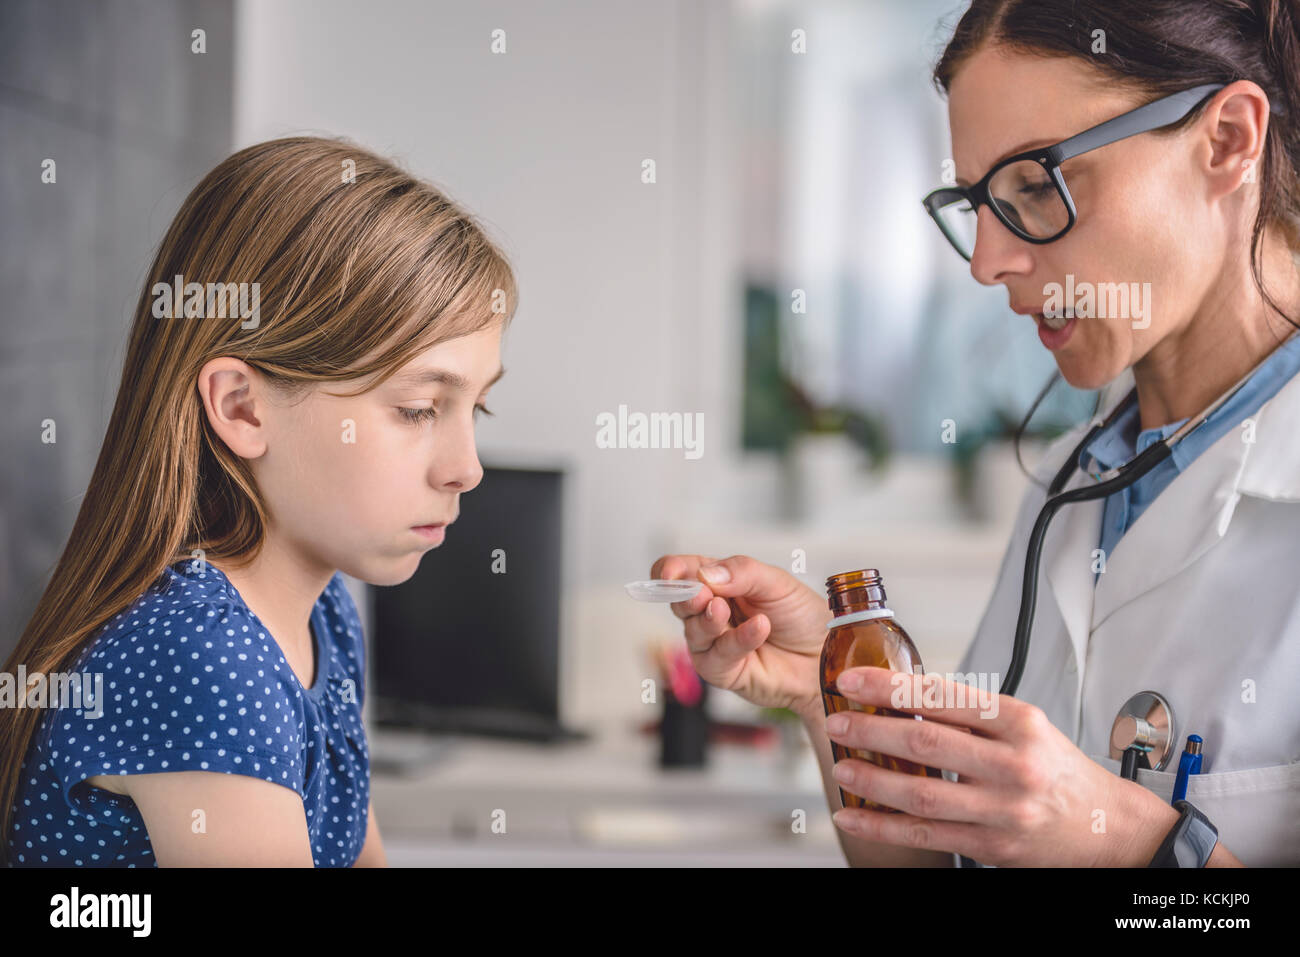 Sick girl receiving treatment at the hospital Stock Photo